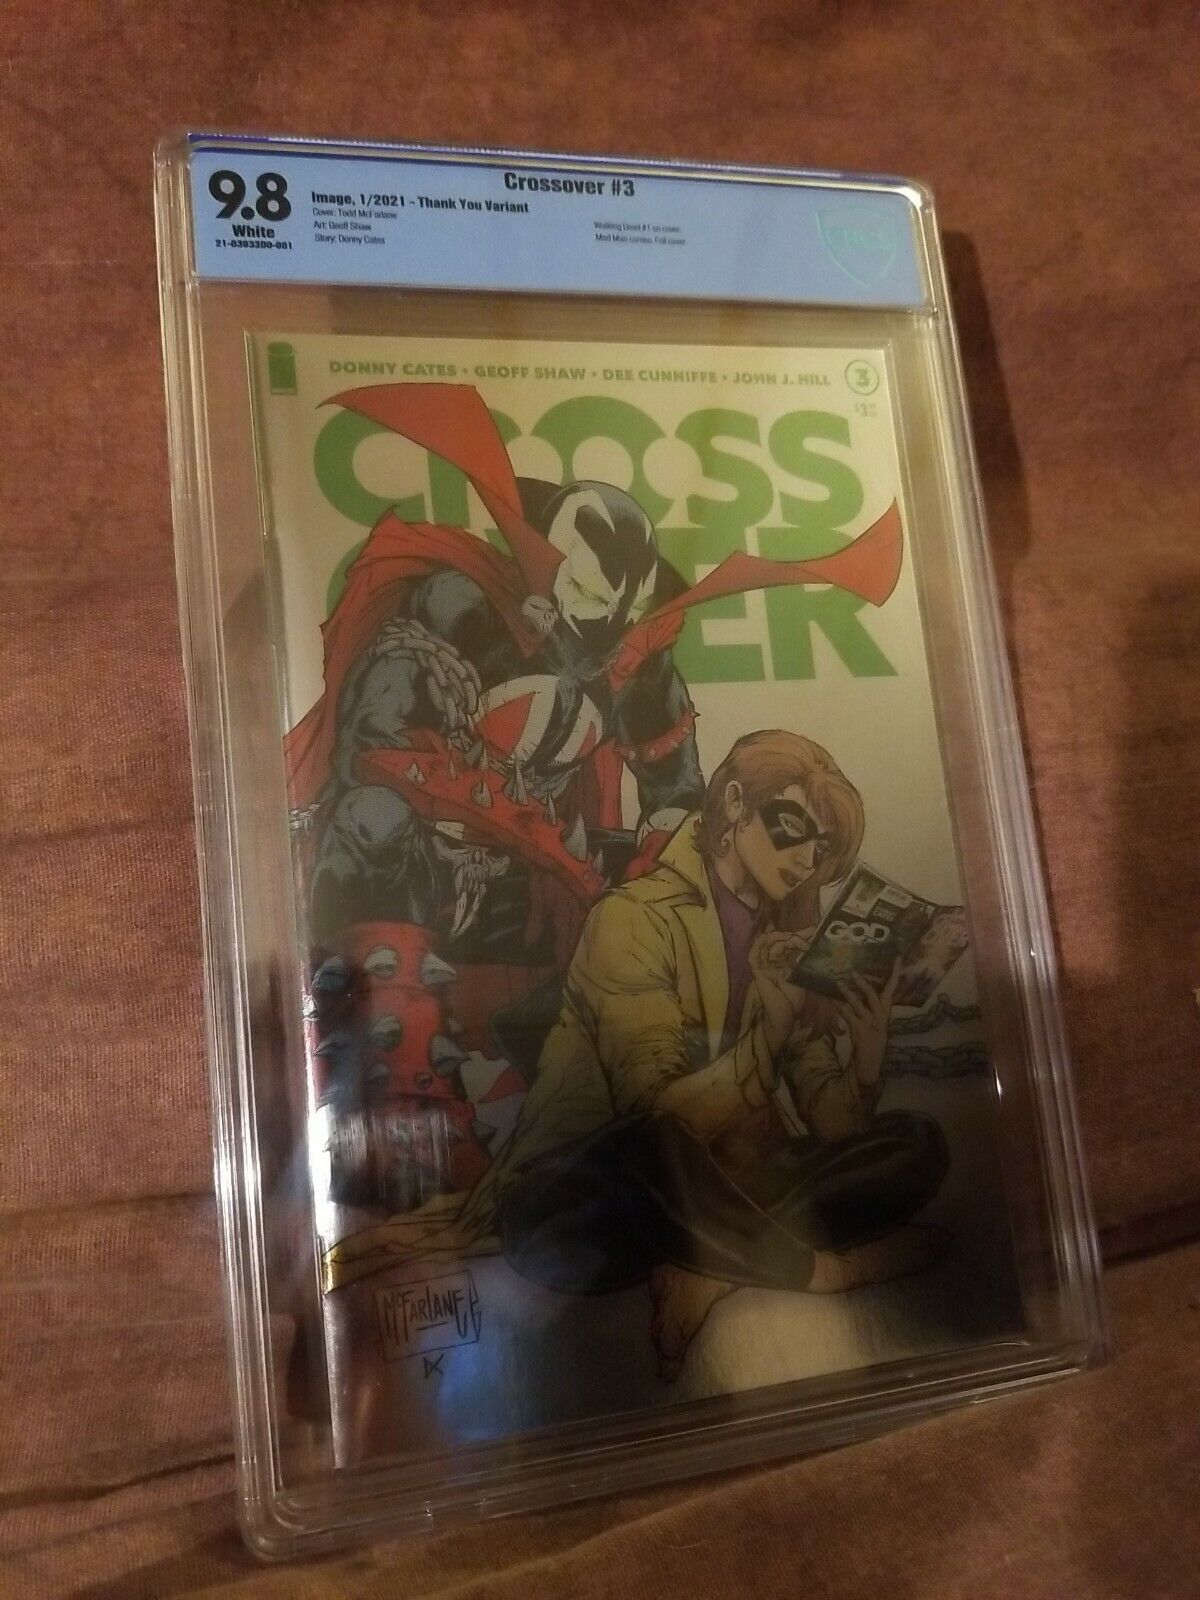  Crossover 3 Foil One Per Store McFarlane Variant CBCS 9.8